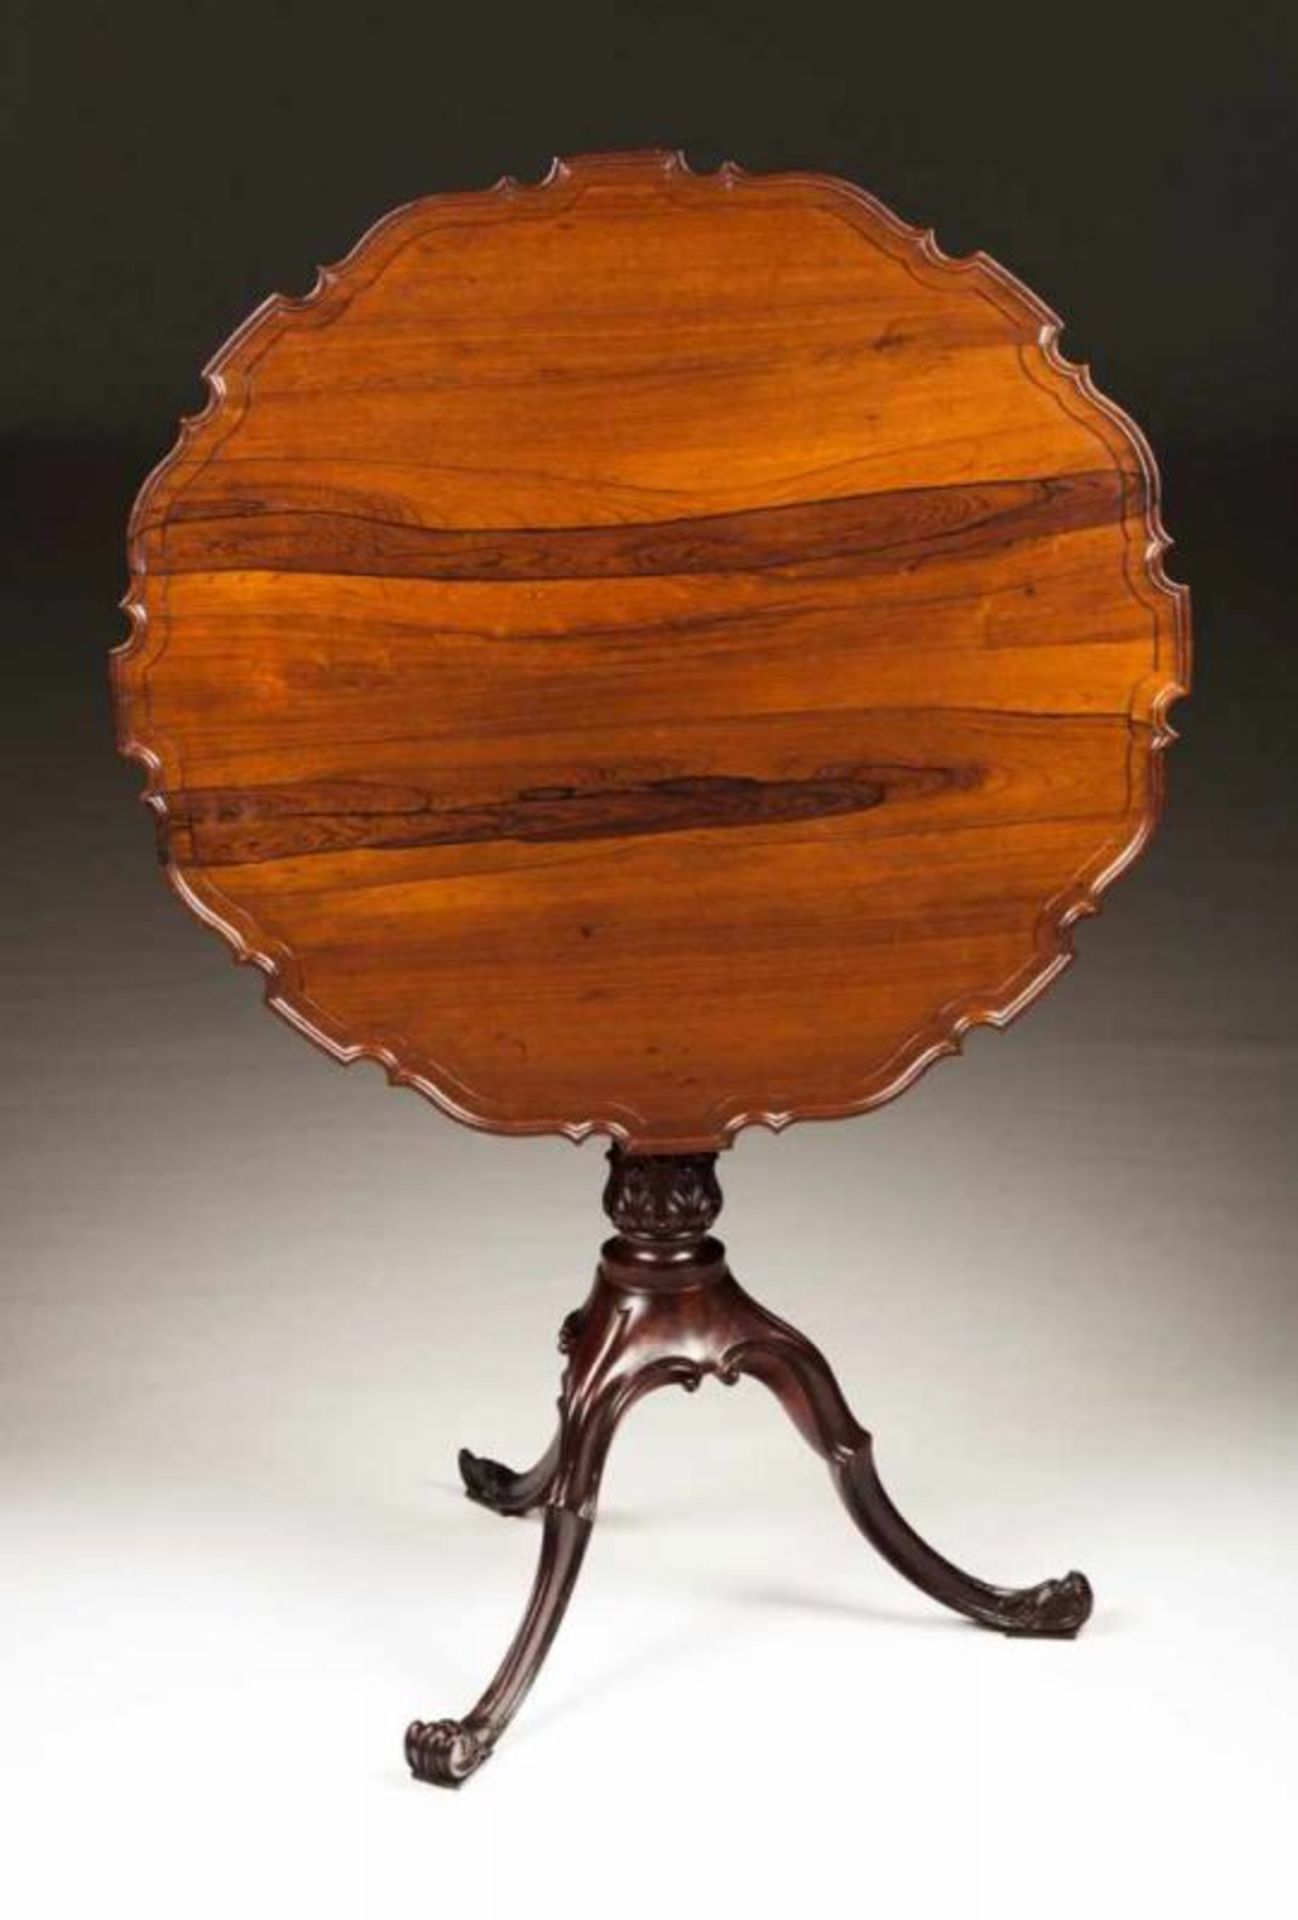 A D. José (1750-1777) tripod table Rosewood Scalloped tilt-top Carved central stem Portugal, 18th